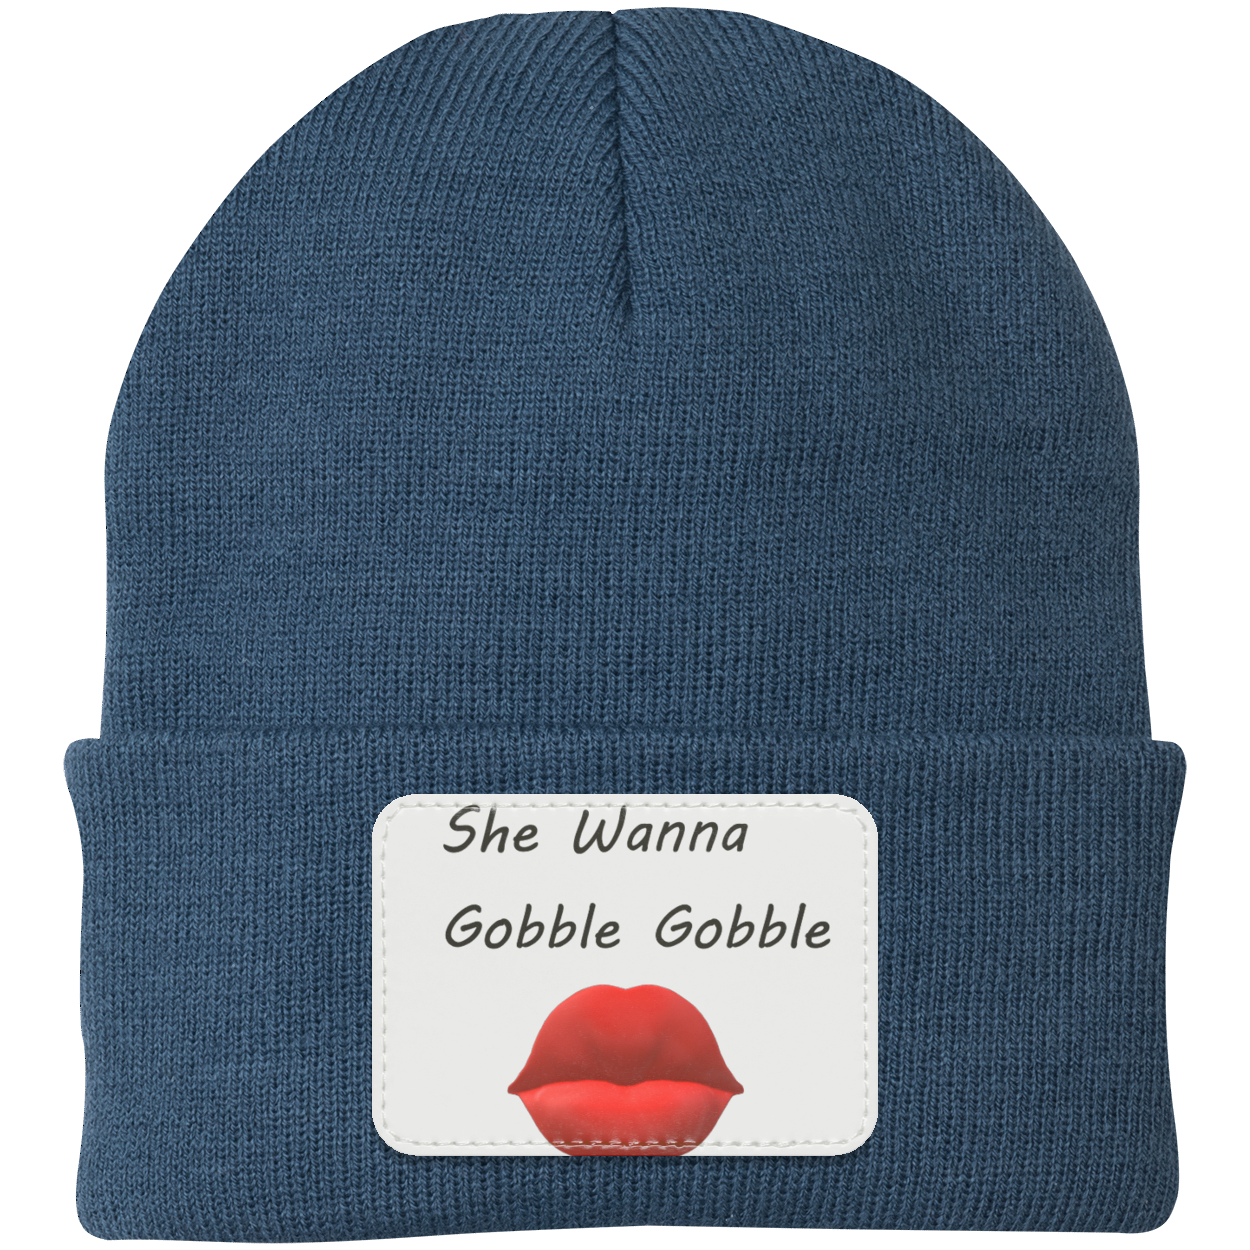 She wanna gobble gobble Knit Cap - Patch